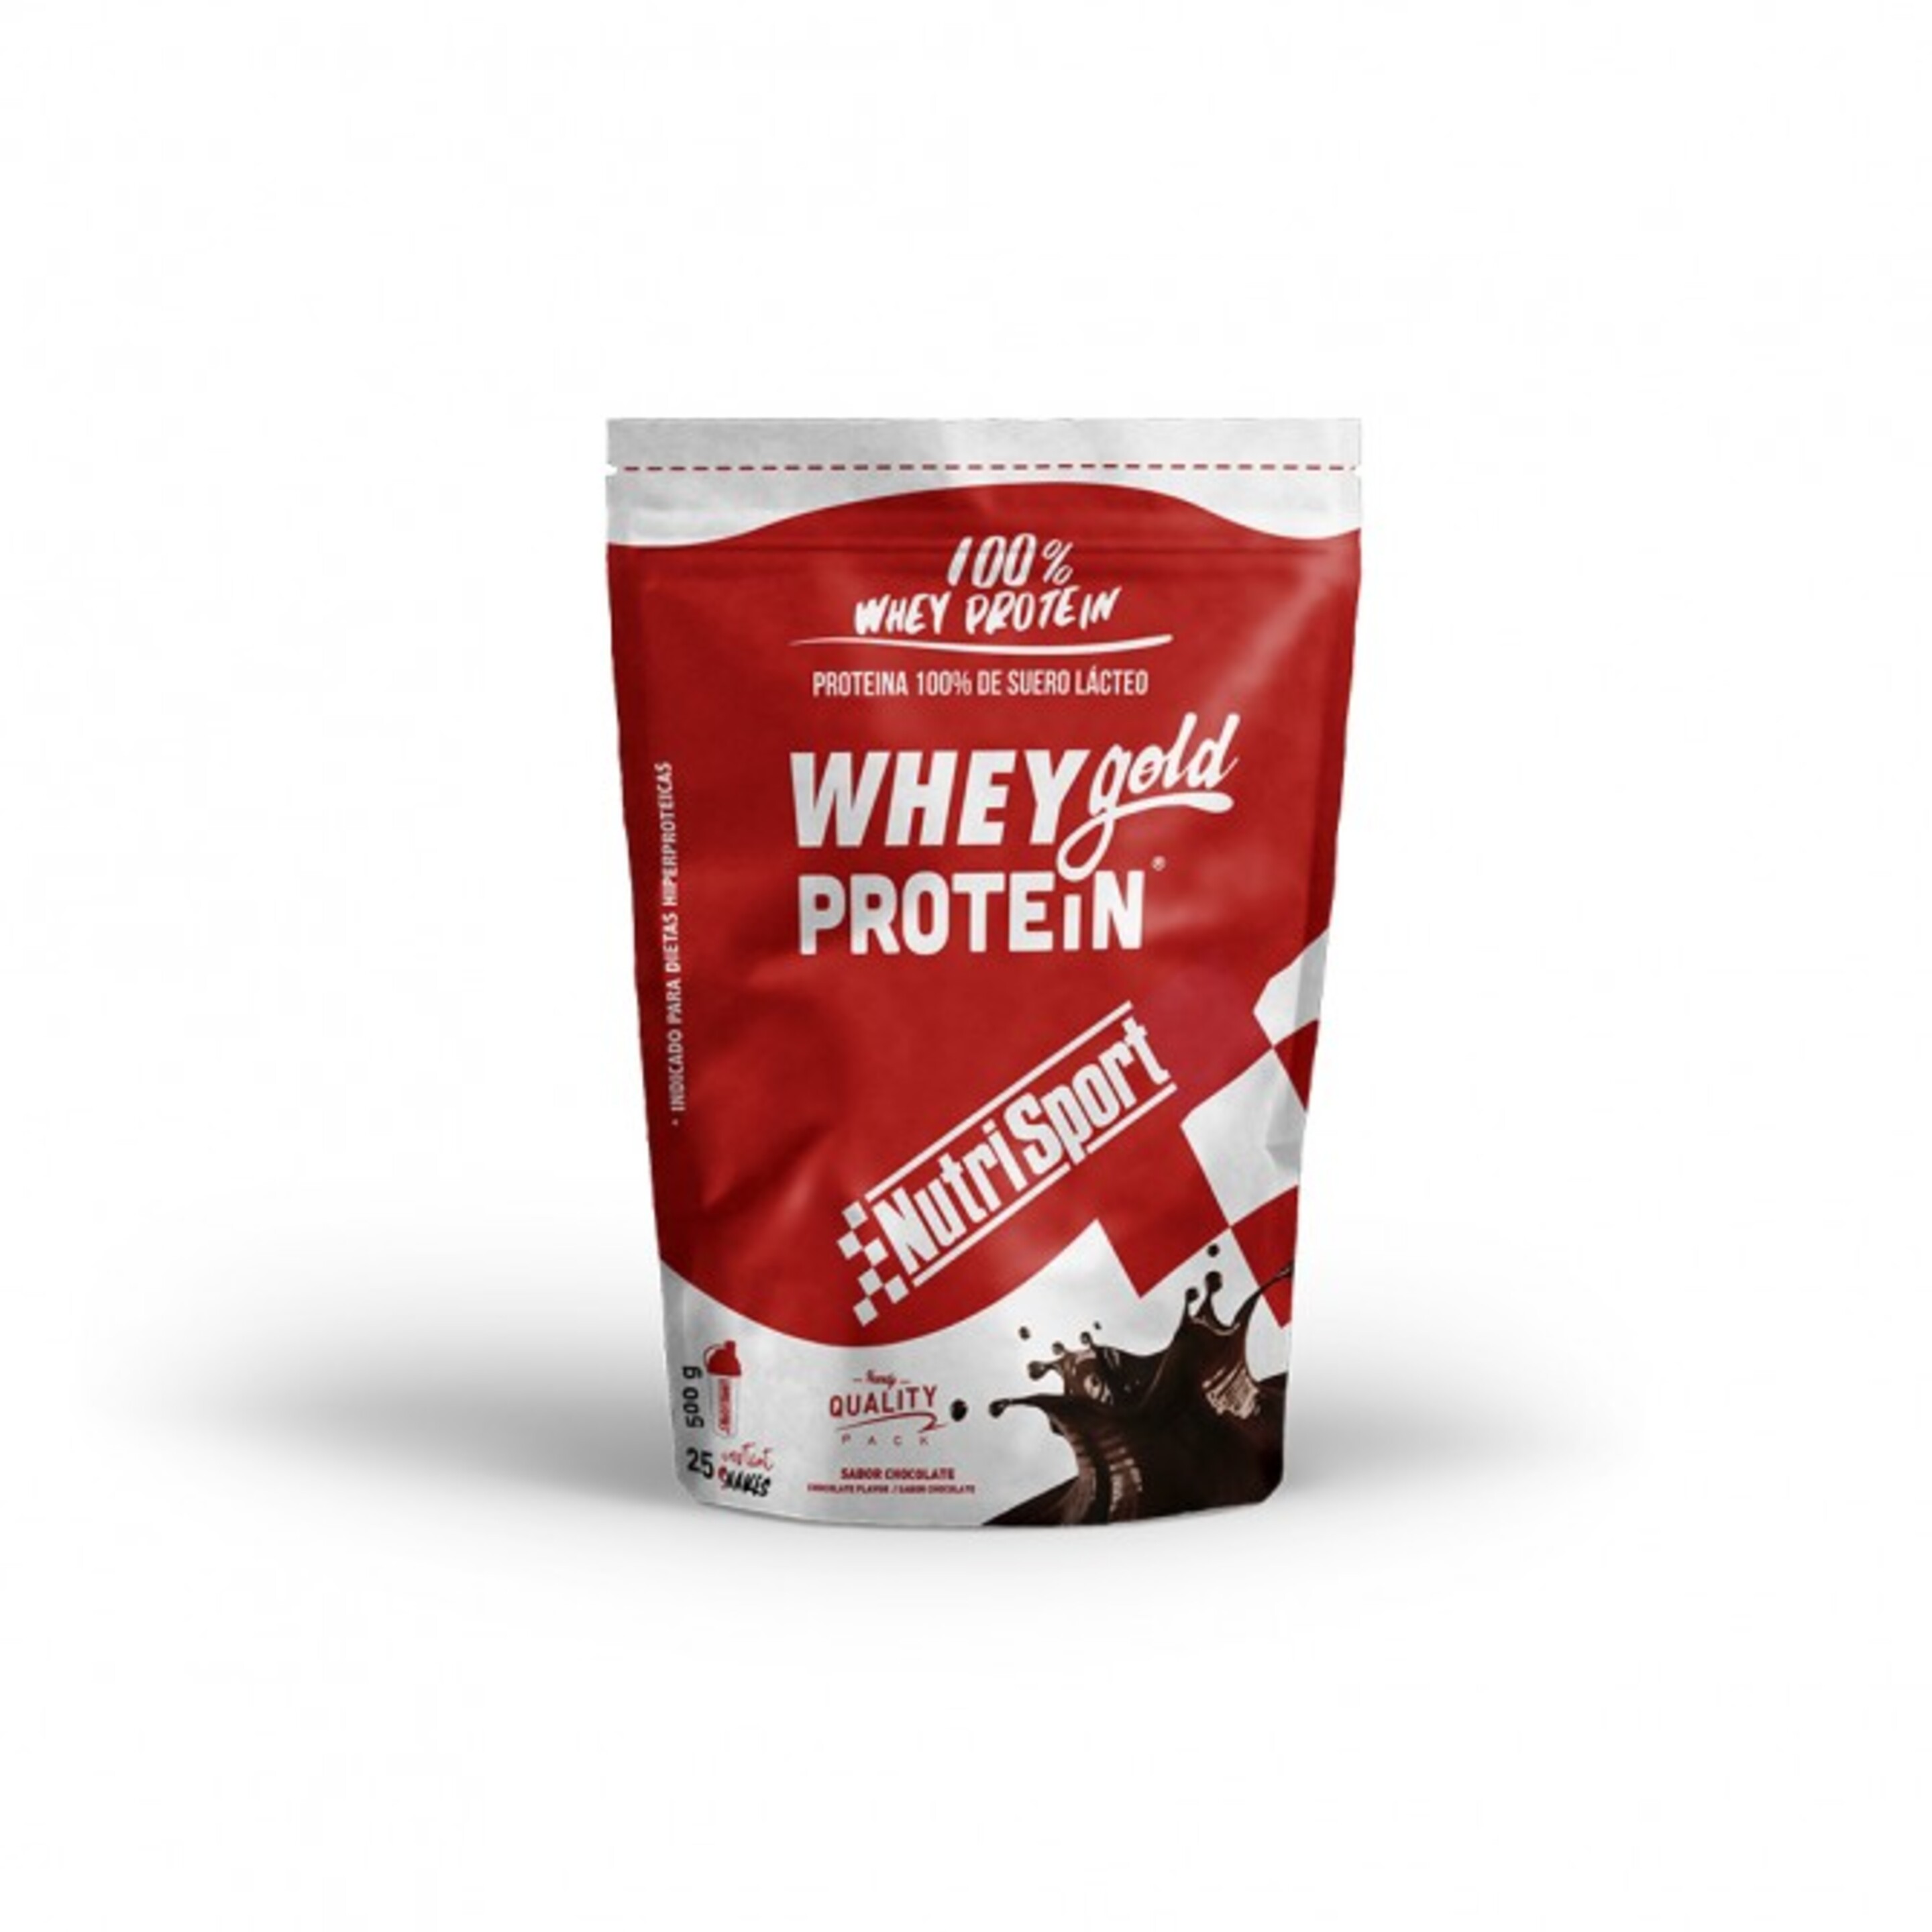 Whey Gold Protein 500g - Chocolate -  - 